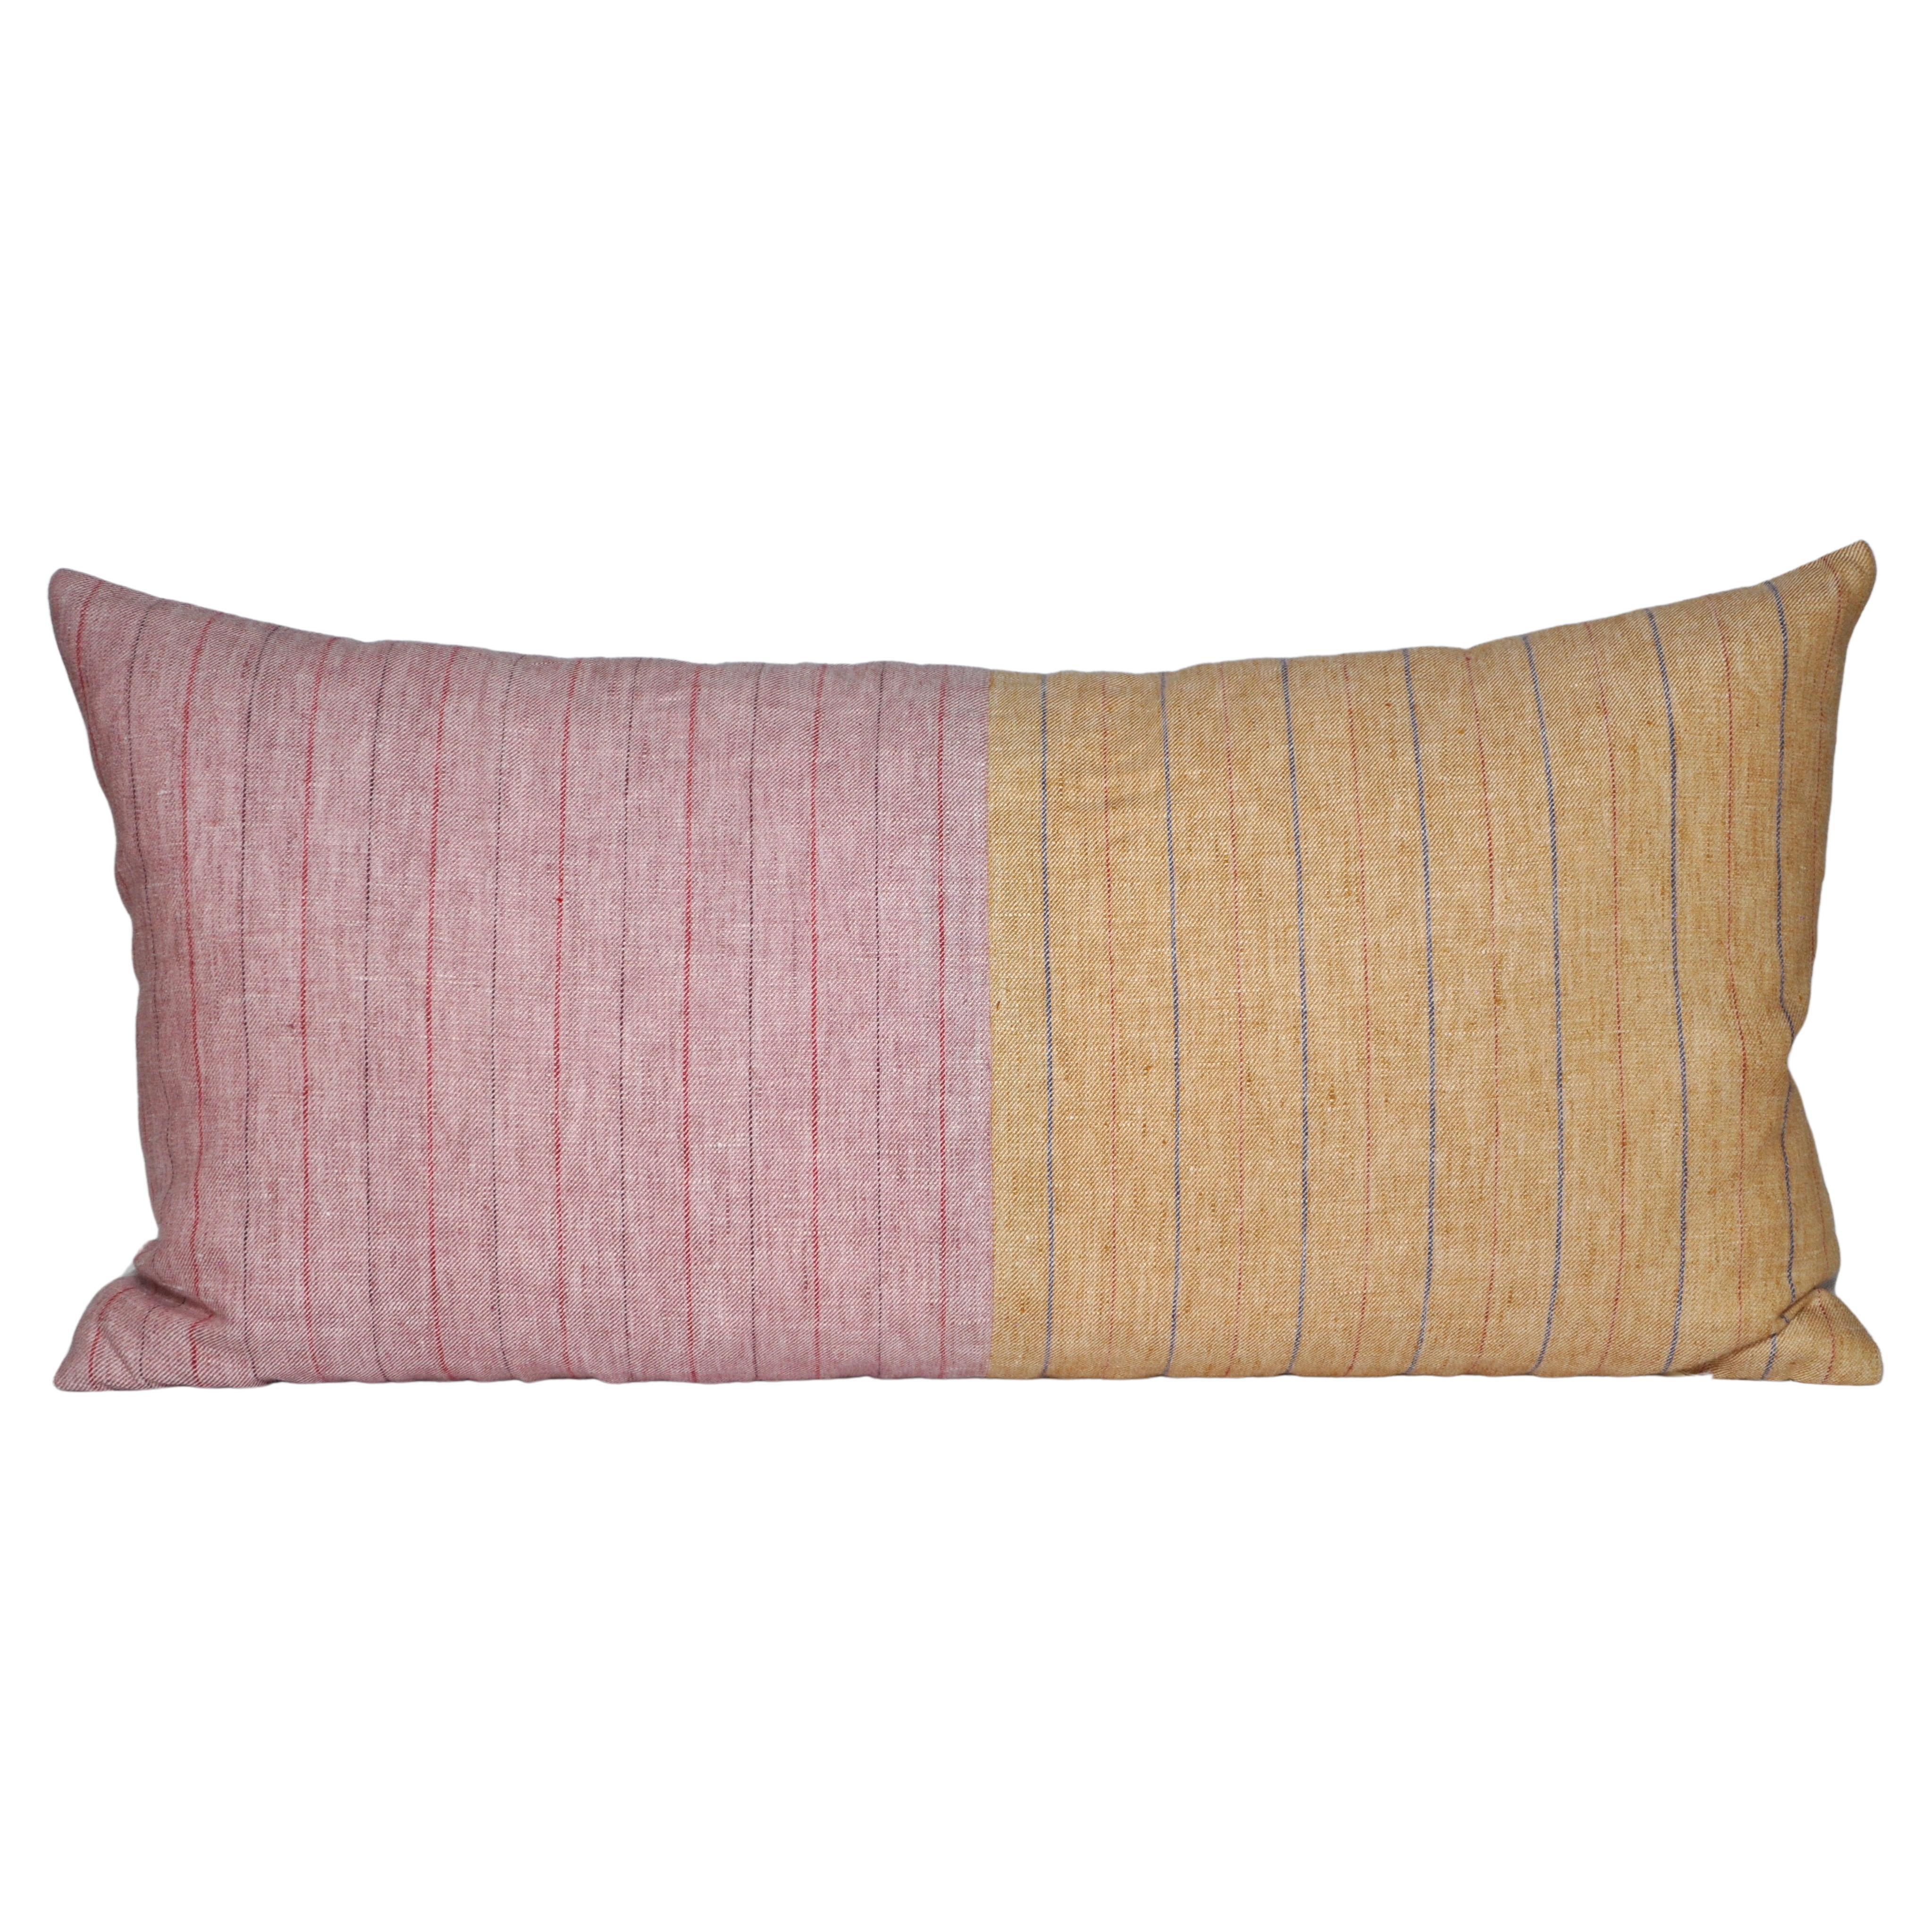 Luxury Handwoven Irish Linen Pillow Gold Yellow Pink Stripes Cushion For Sale